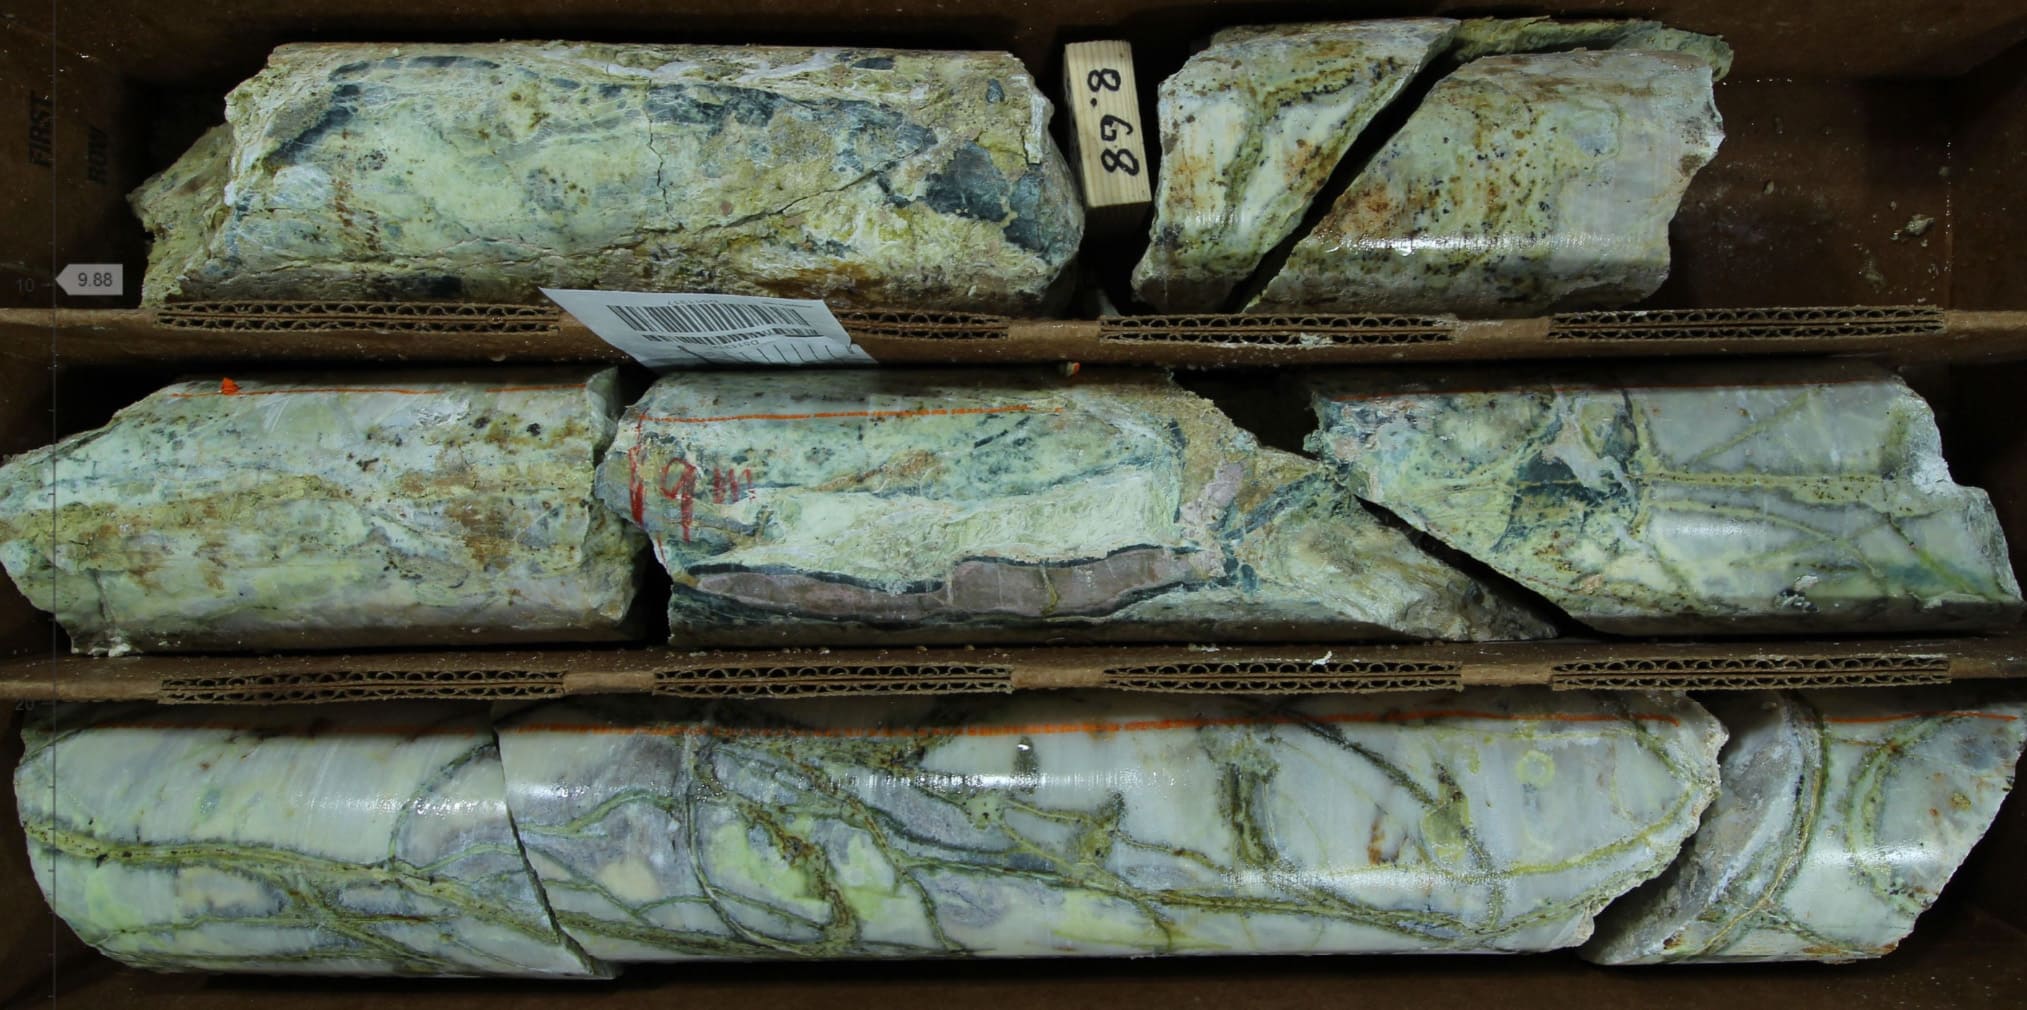 Dark grey limestone recrystallized to marble, with intense stockworks of dark green pyroxene veins cored by quartz and sulfide altering to yellow-green nontronite clay and copper oxide minerals (Hole 002; 9 m; PQ core).